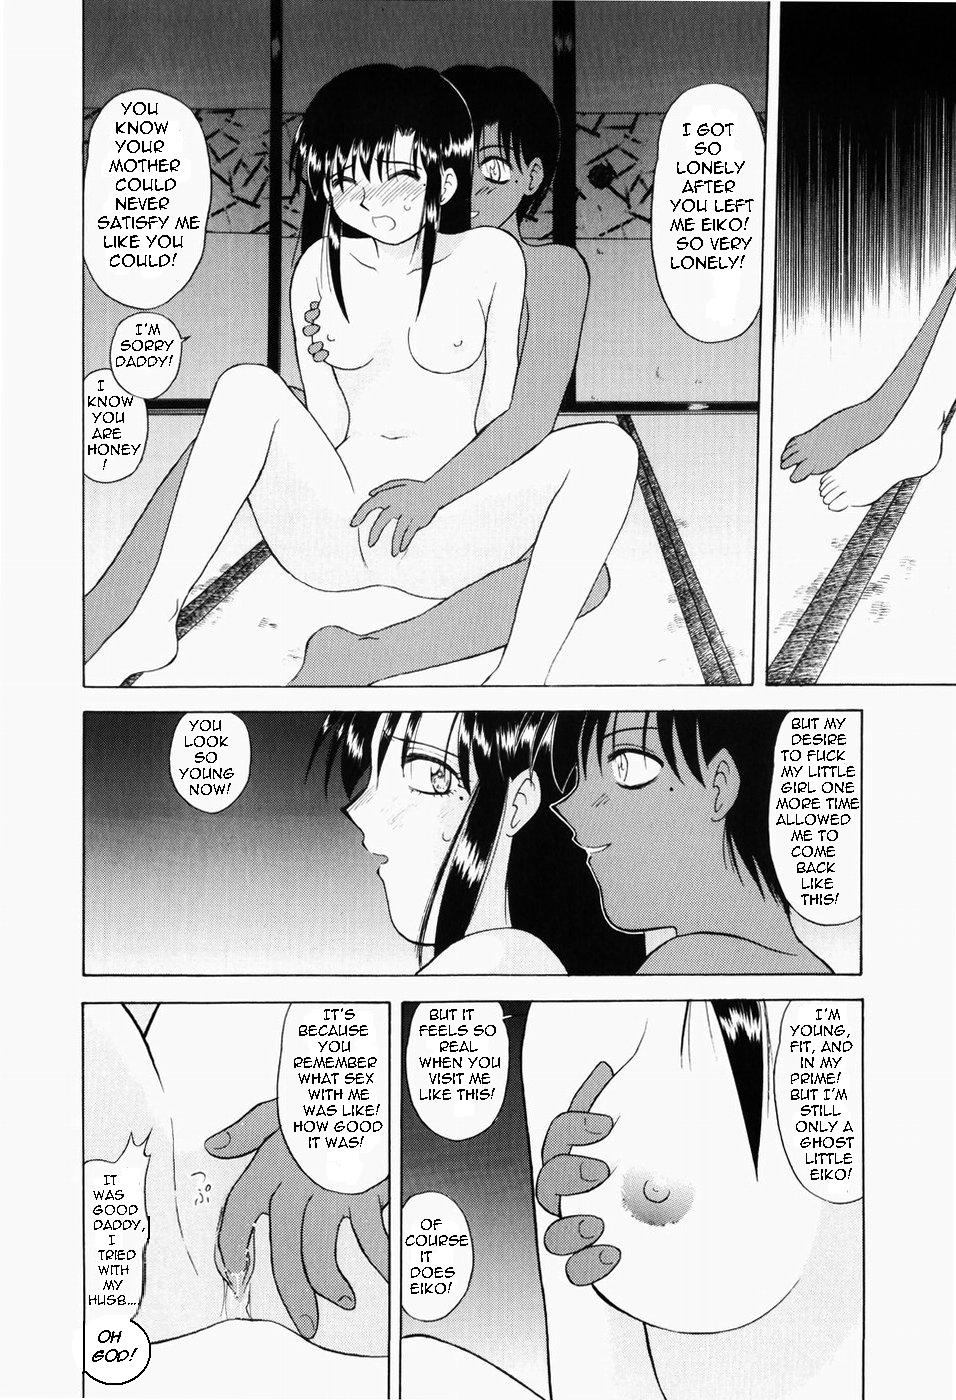 The Mother with the Phantom Dick (hentai,incest,english)